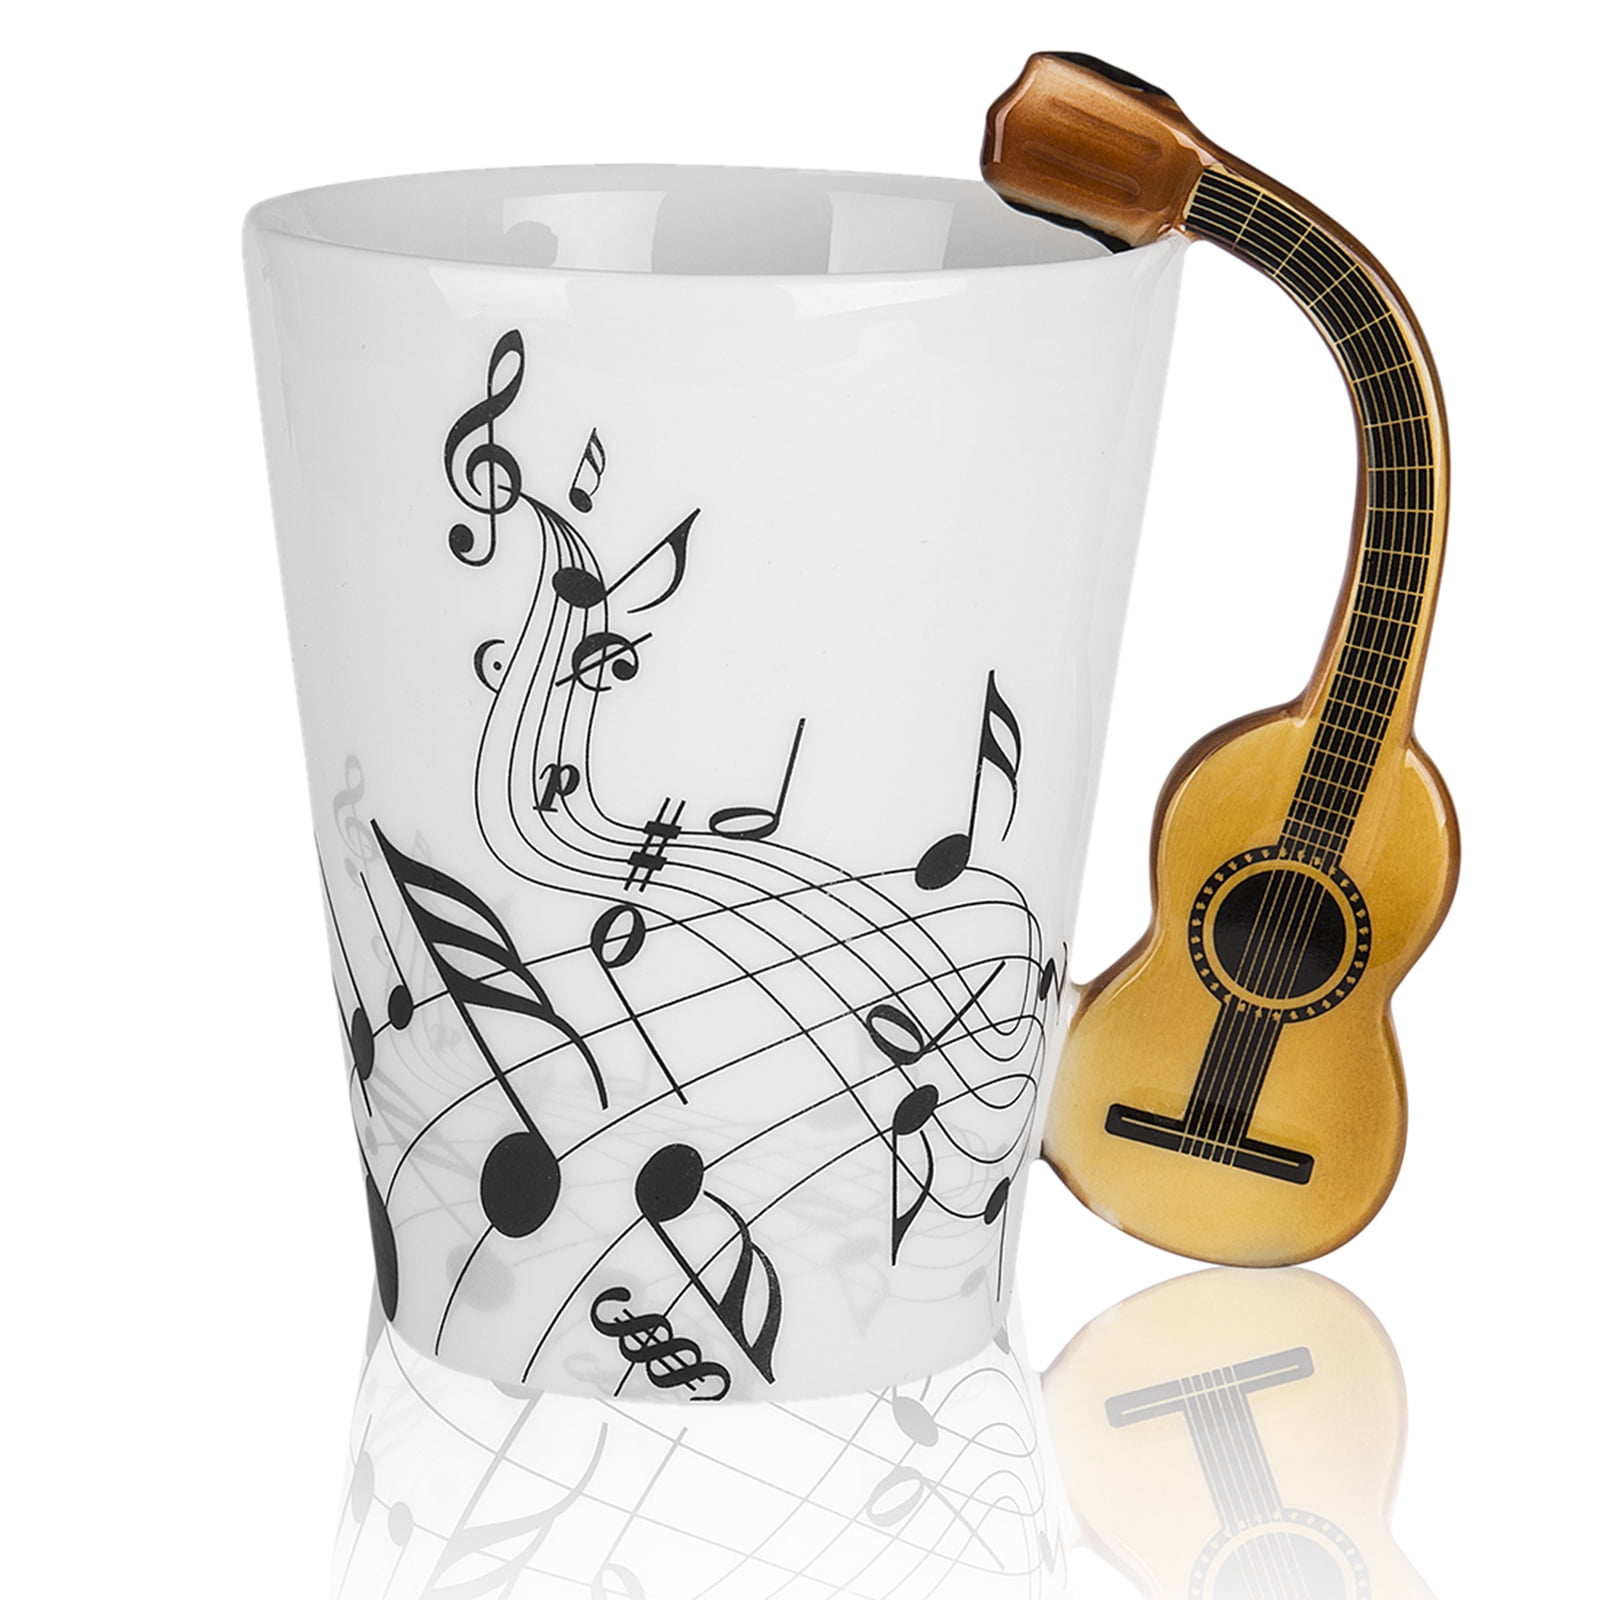  ZZZZS Layne Music Staley Singer Mug Coffee Tea Cup Mugs For  Birthday Gift Home Kitchen Office 12Oz : Home & Kitchen